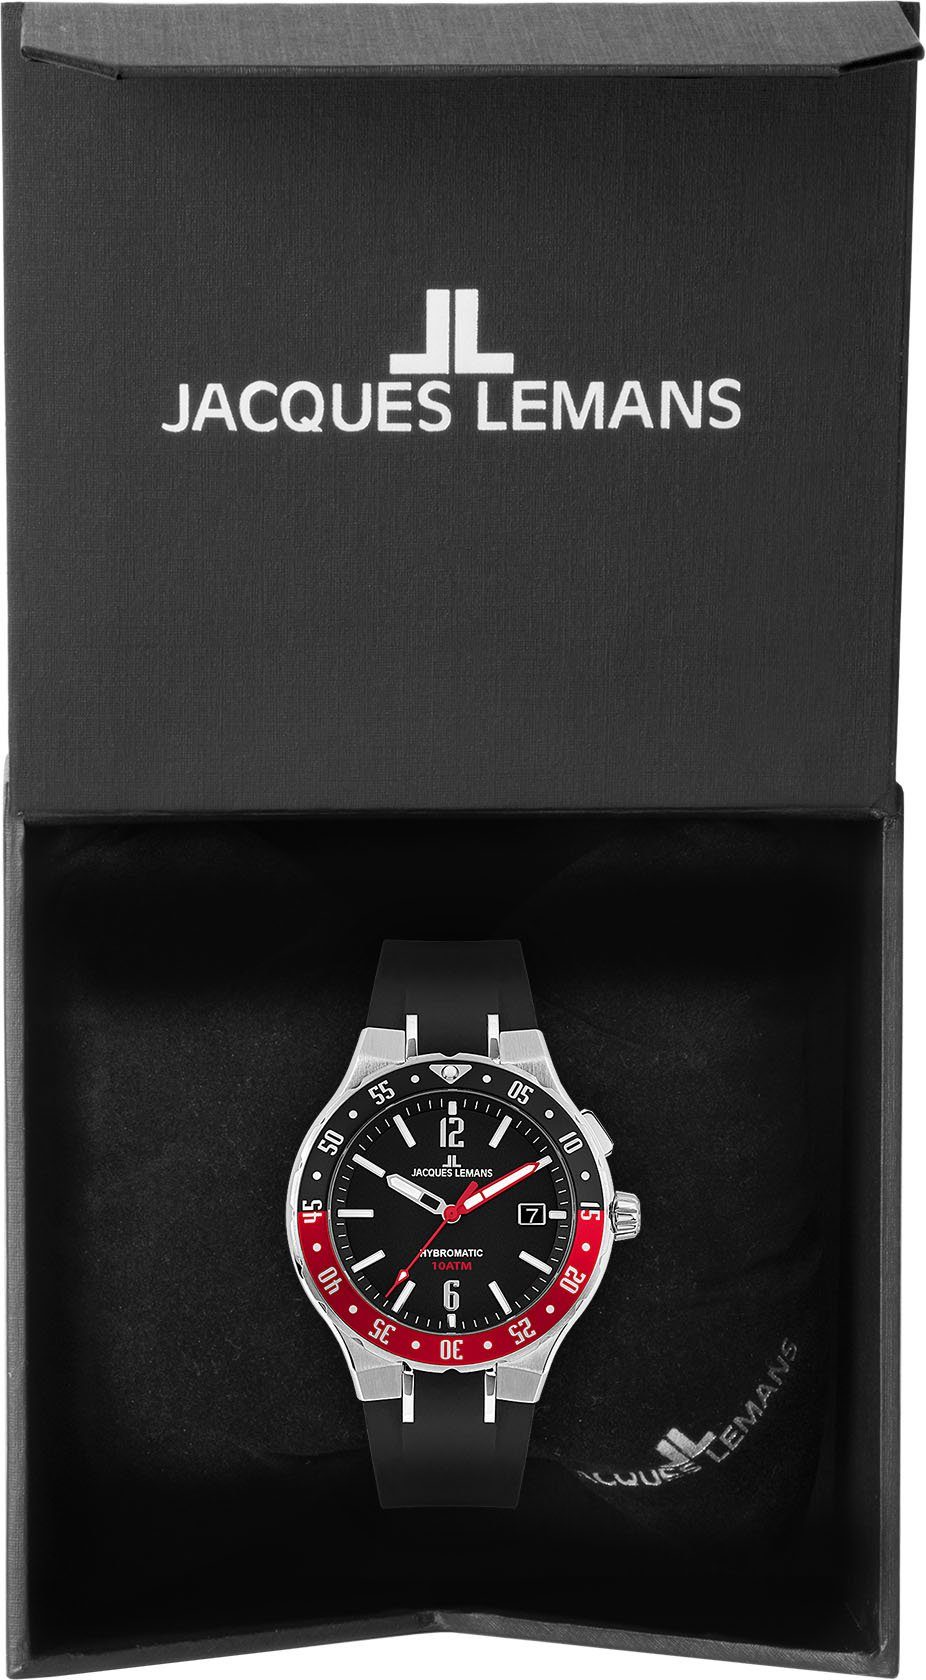 Jacques 1-2109A Lemans rot, schwarz Kineticuhr Hybromatic,